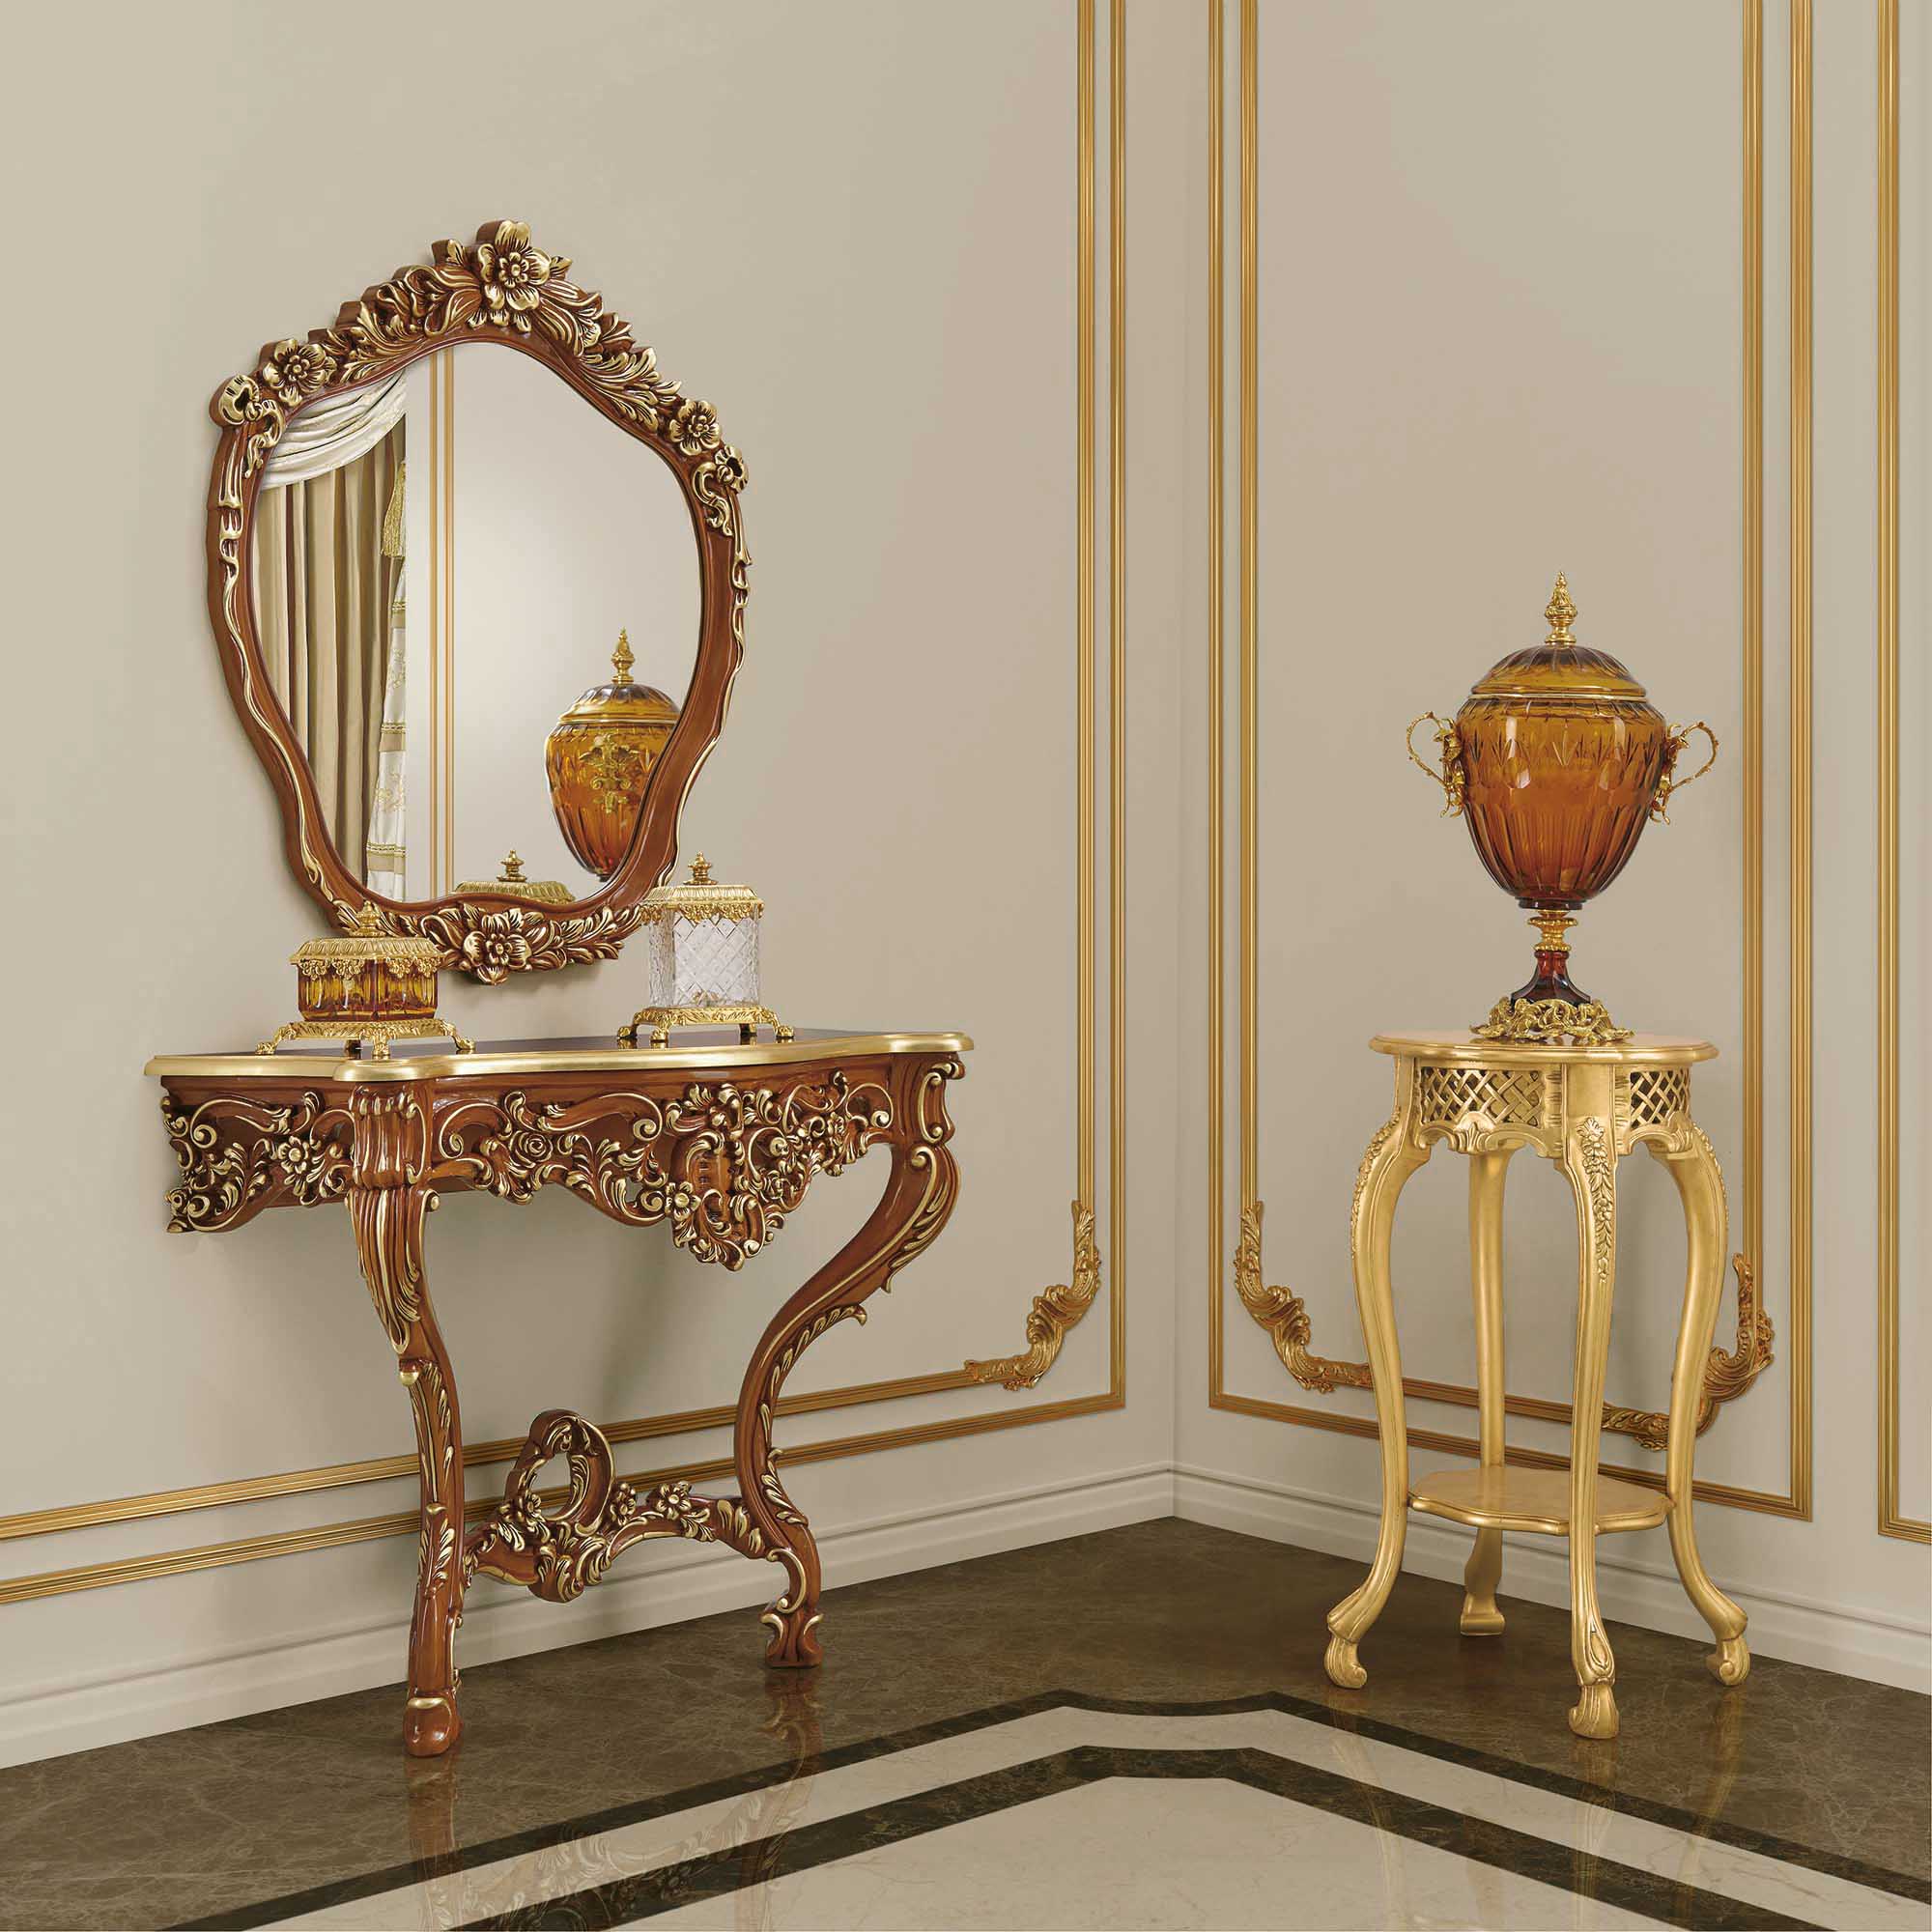 Transforming Spaces with Unique Modenese Furniture, Luxury Vases, and Classic Decor Items